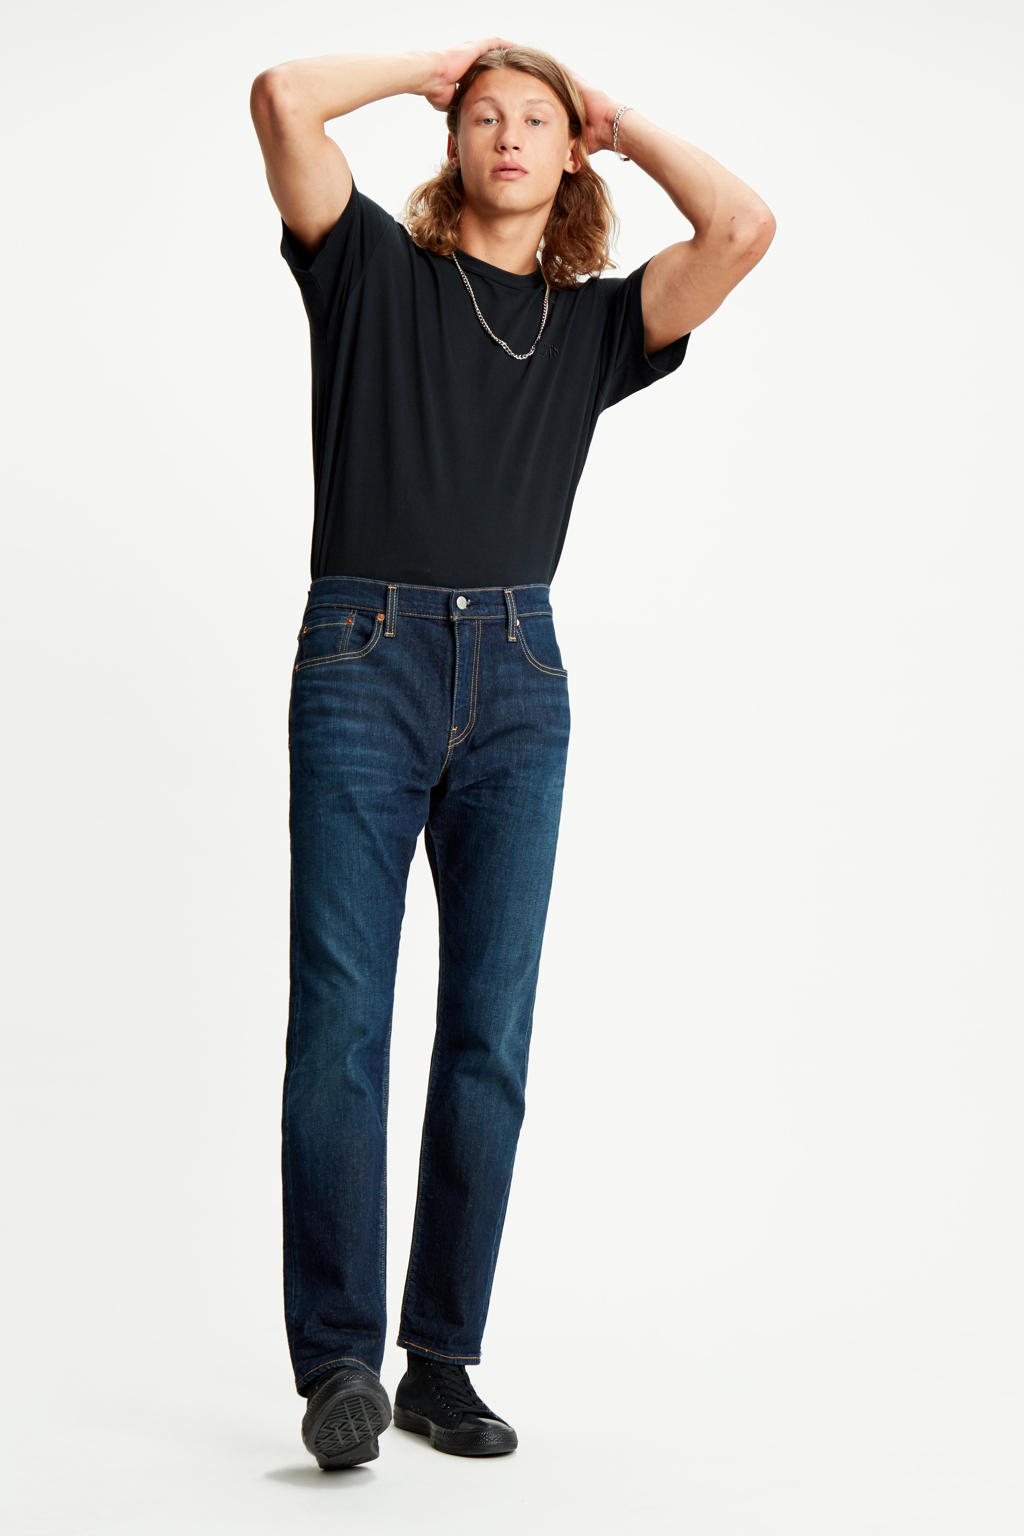 Levi's 502 tapered fit jeans biologia